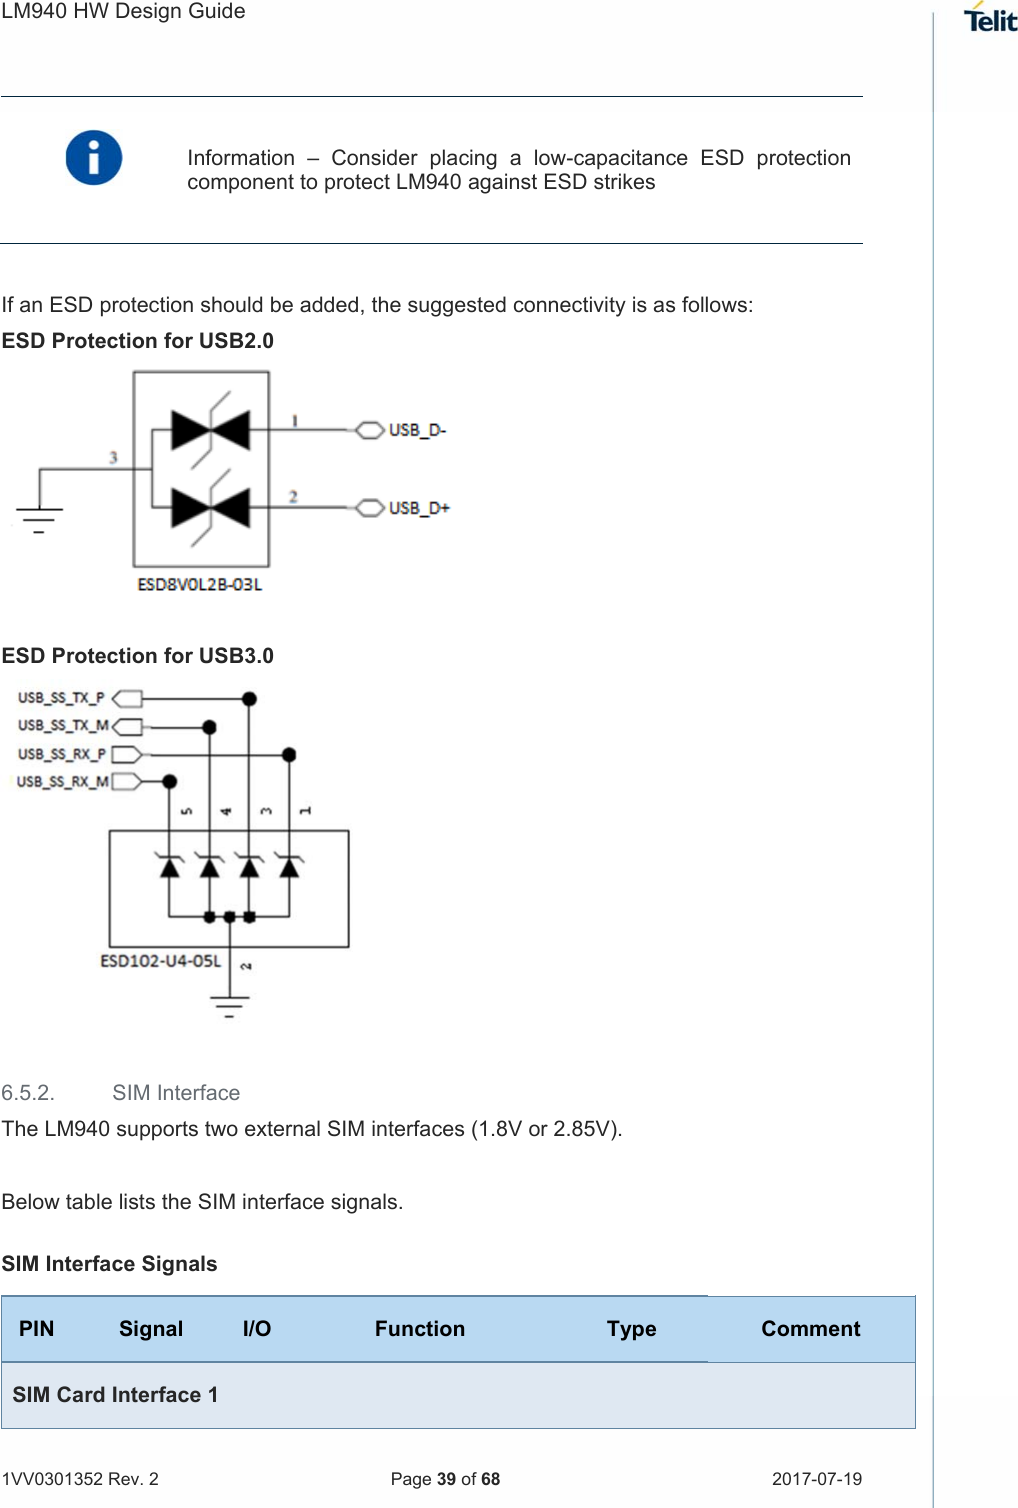 LM940 HW Design Guide   1VV0301352 Rev. 2   Page 39 of 68  2017-07-19    Information  –  Consider  placing  a  low-capacitance  ESD  protection component to protect LM940 against ESD strikes    If an ESD protection should be added, the suggested connectivity is as follows: ESD Protection for USB2.0   ESD Protection for USB3.0   6.5.2.  SIM Interface The LM940 supports two external SIM interfaces (1.8V or 2.85V).  Below table lists the SIM interface signals.  SIM Interface Signals PIN Signal I/O Function Type Comment SIM Card Interface 1 